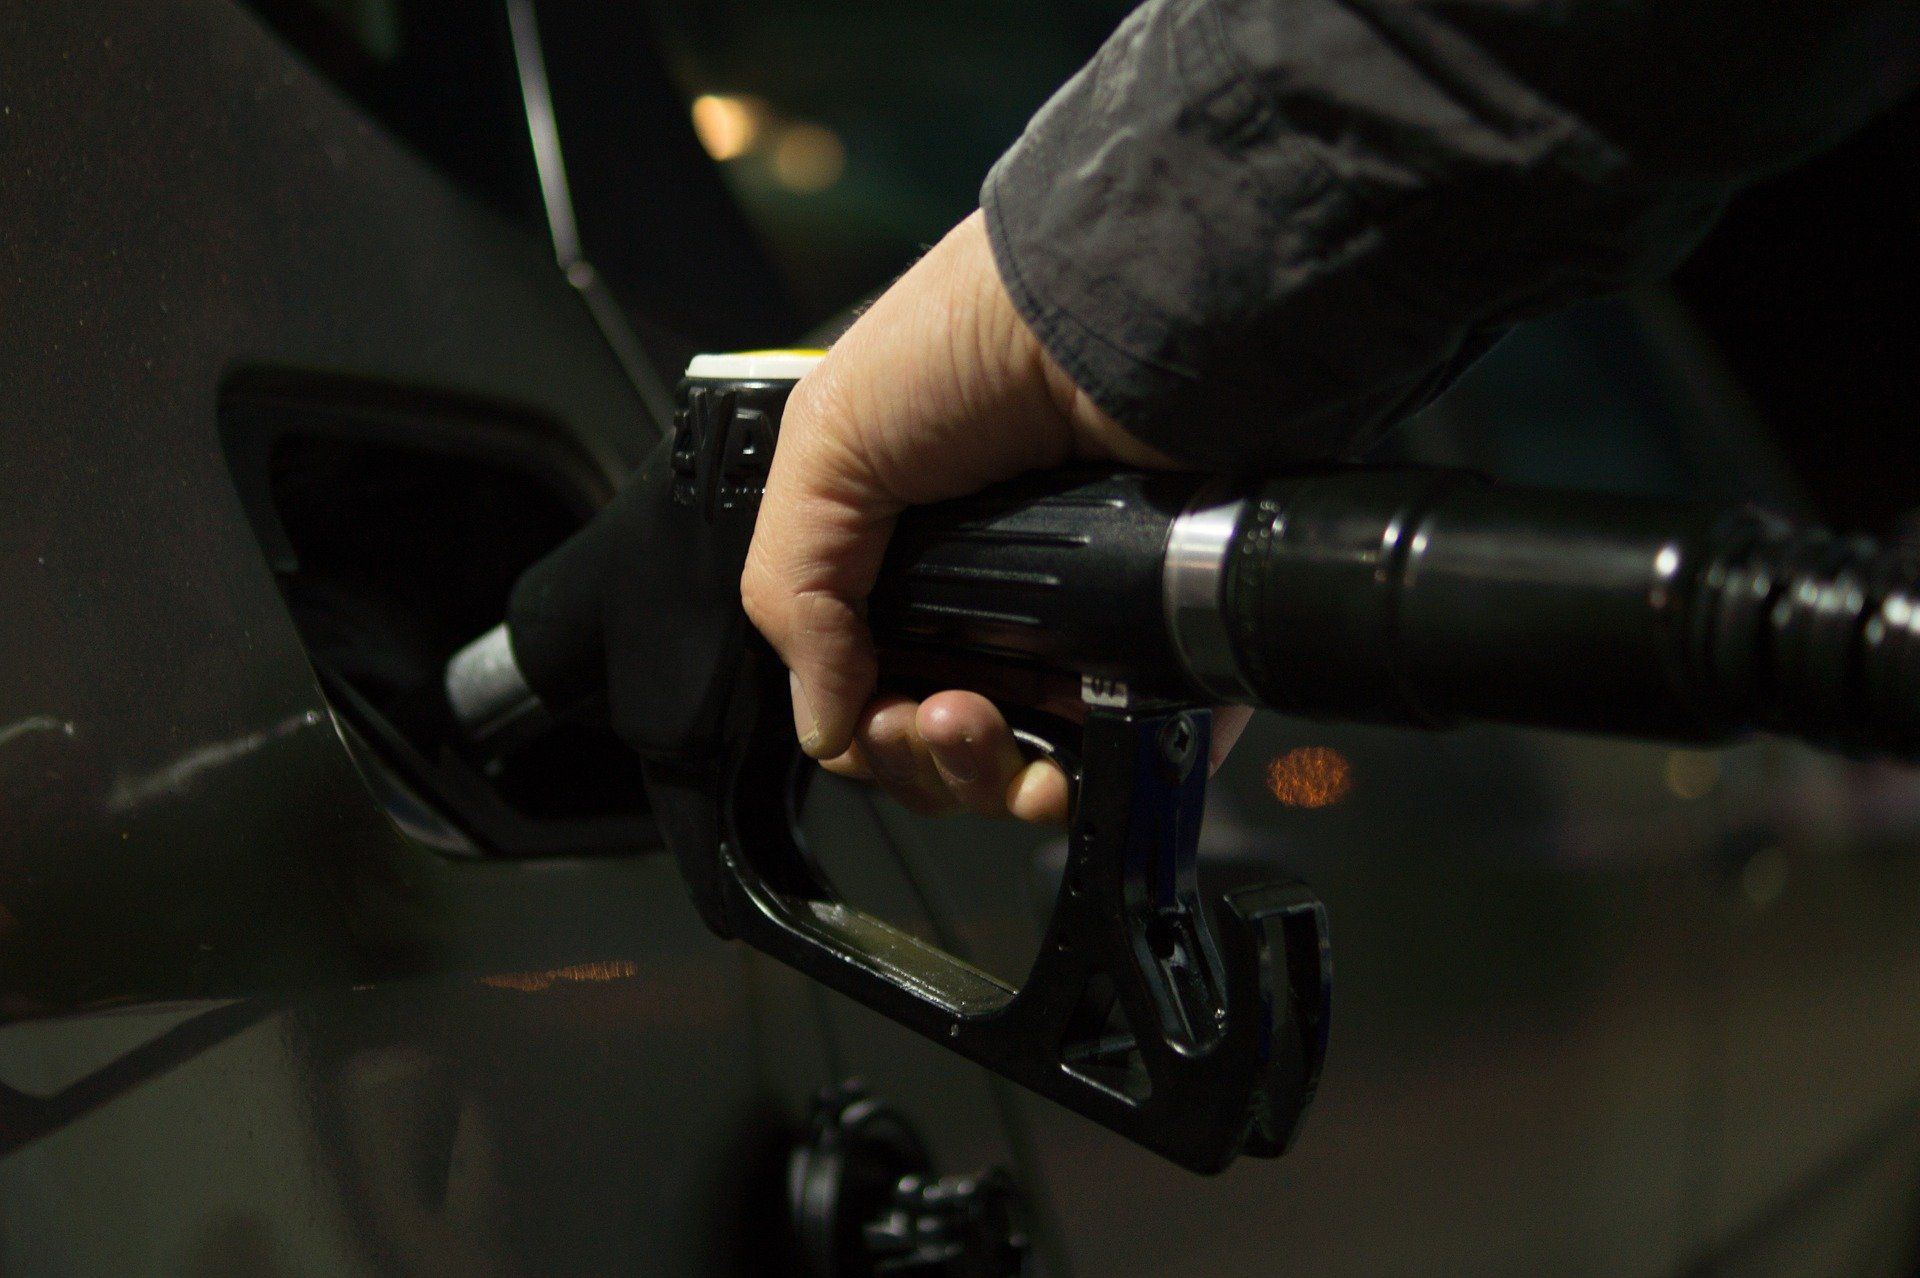 Fuel prices: Petrol priced at Rs 95.41, diesel Rs 86.67 in Delhi on March 10, 2022